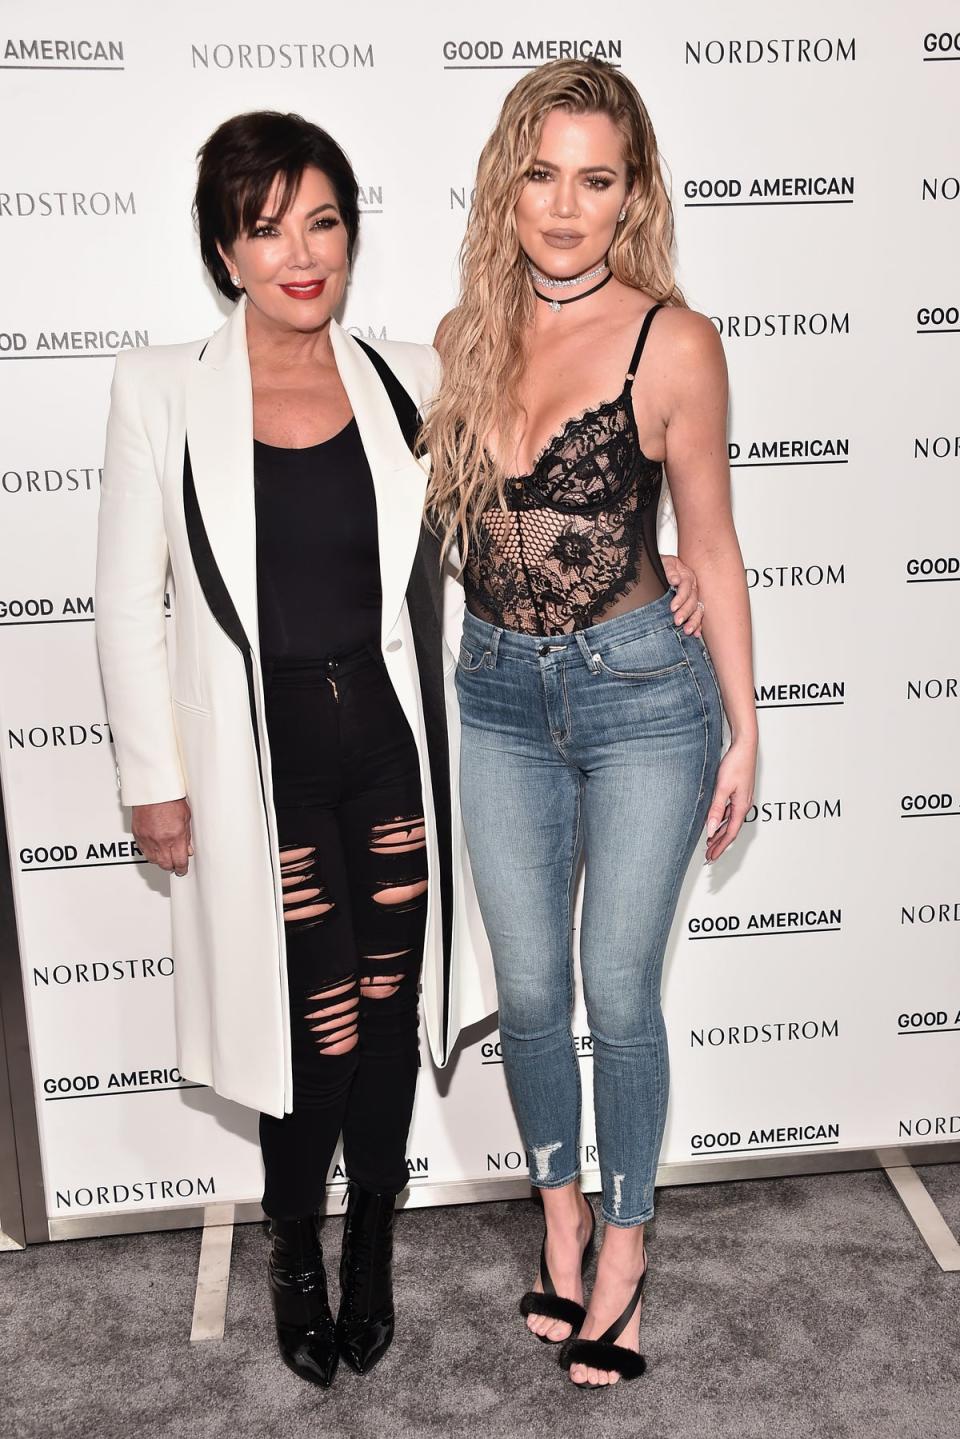 Kris Jenner and Khloe Kardashian pictured together in 2016 (Getty Images)